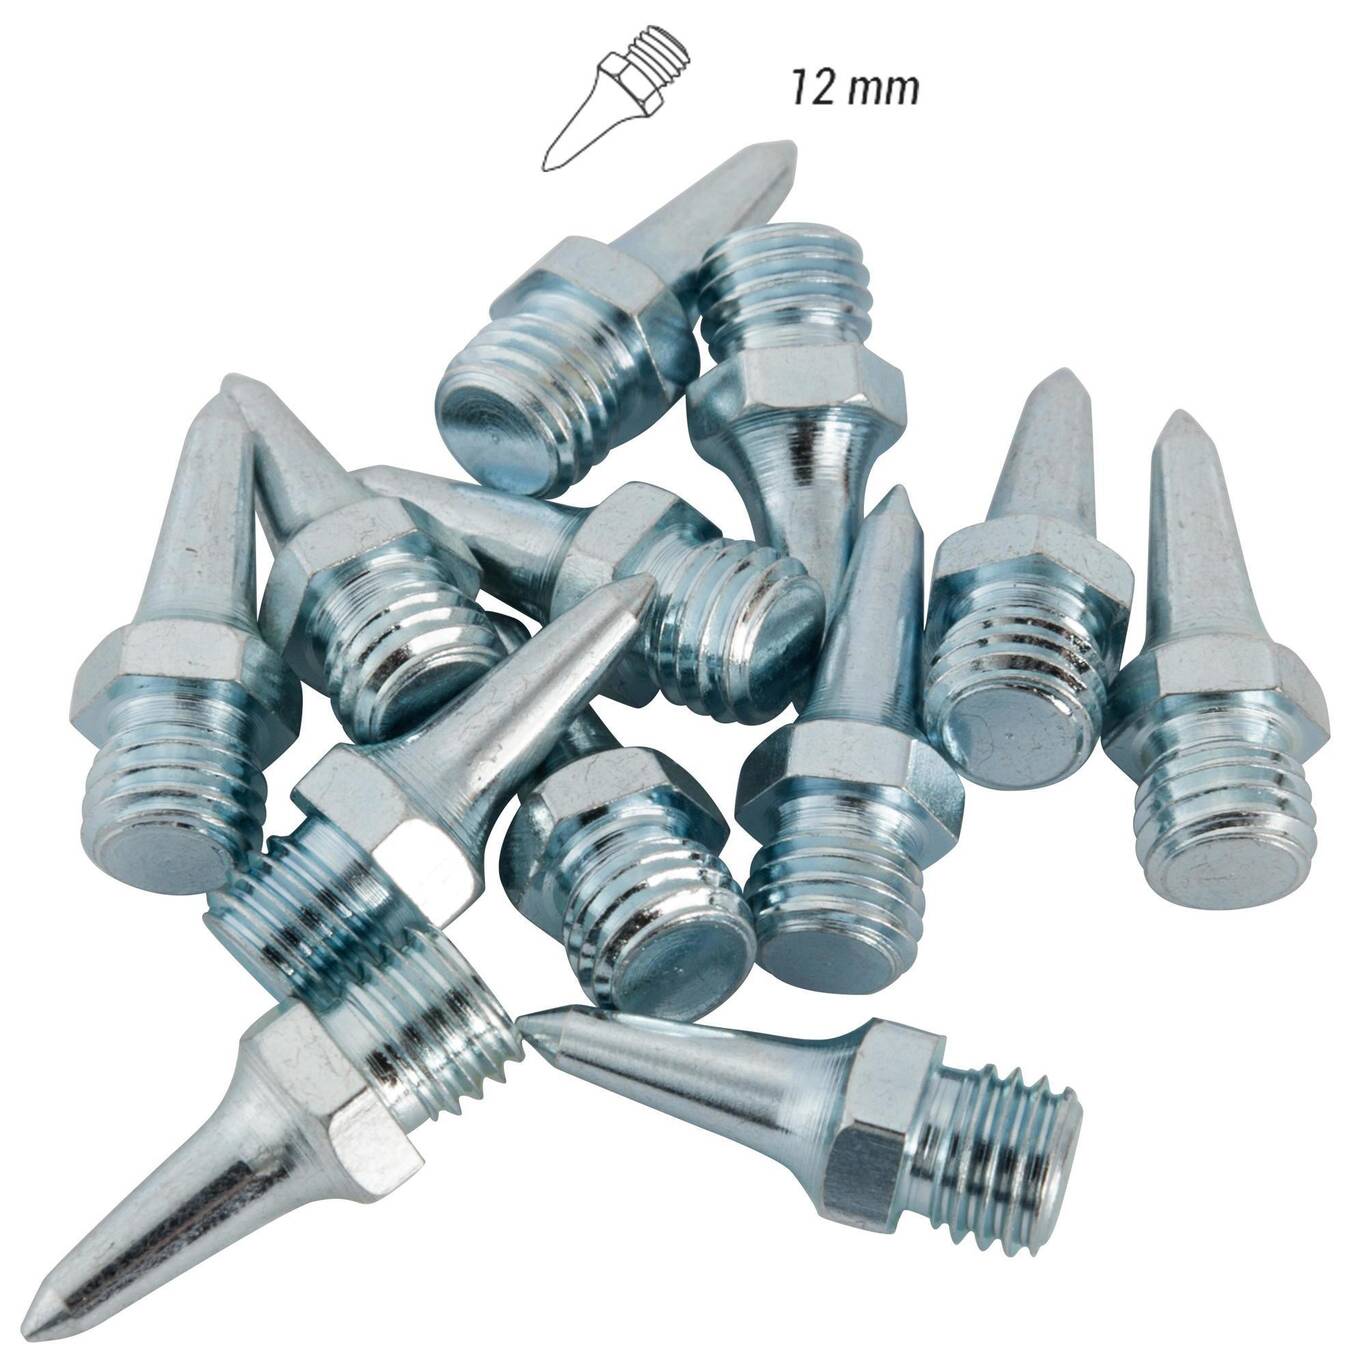 ATHLETICS SHOES SET OF 12 HEX SPIKES 12MM